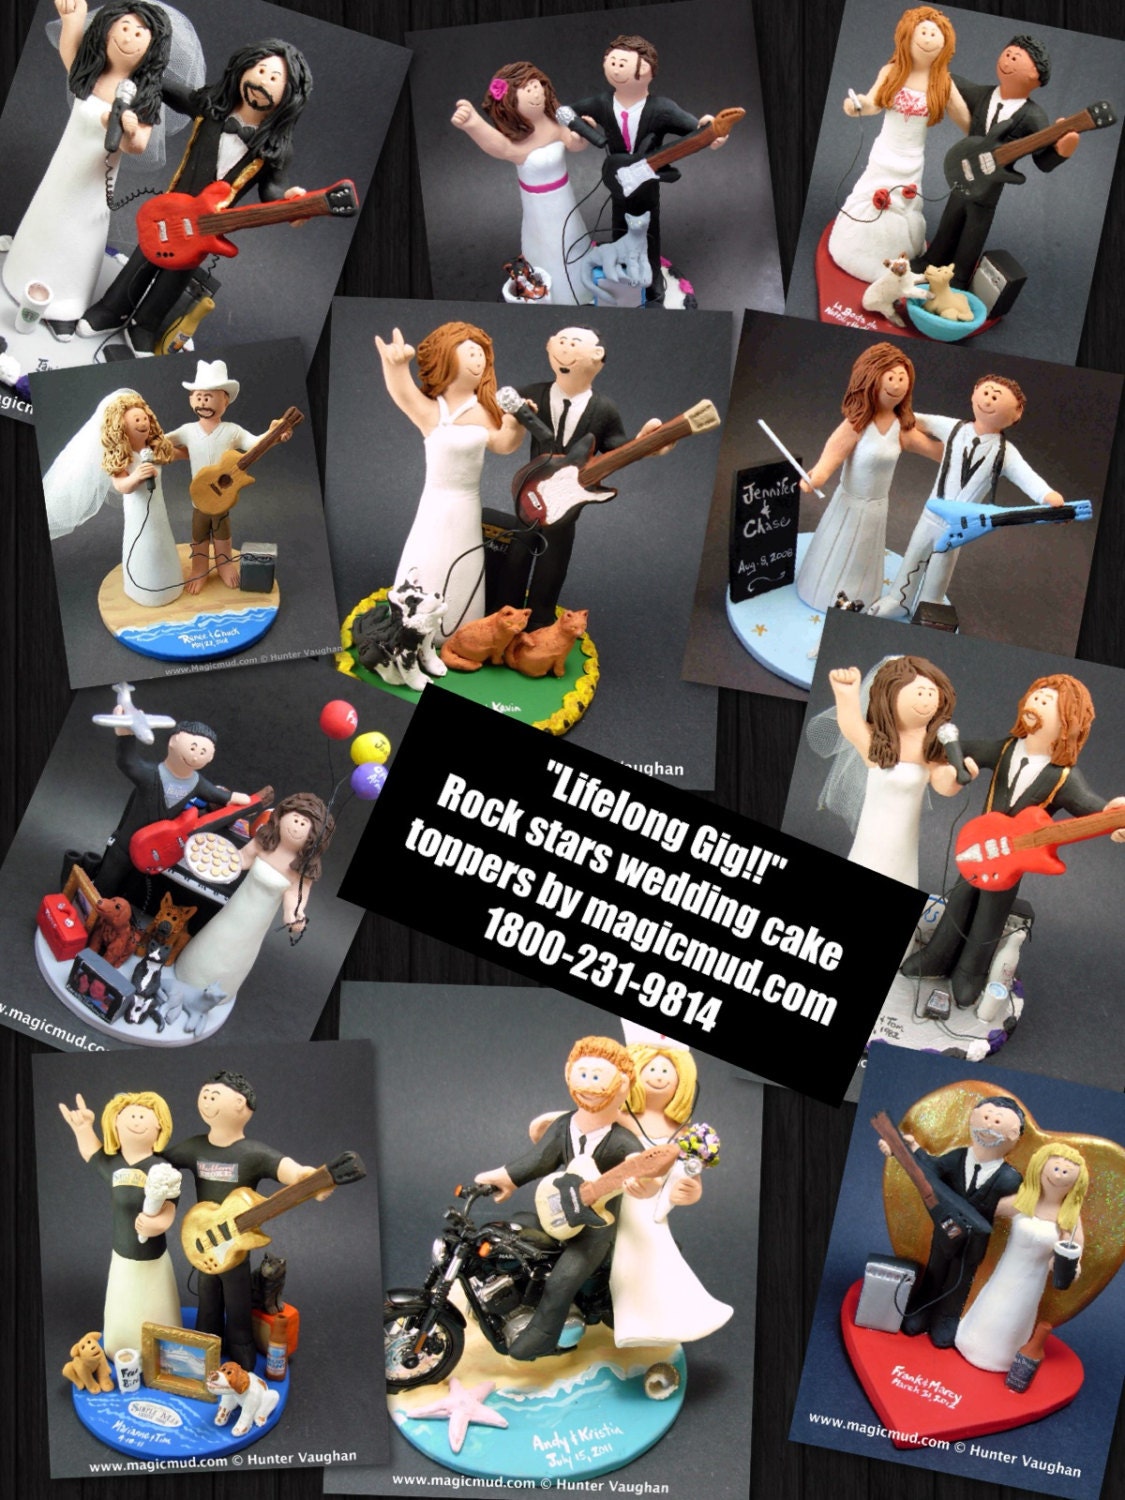 Rock n Roll Guitarist's Wedding Cake Toppers, Custom Made Rock Star Wedding Cake Topper - Guitar Wedding Cake Topper